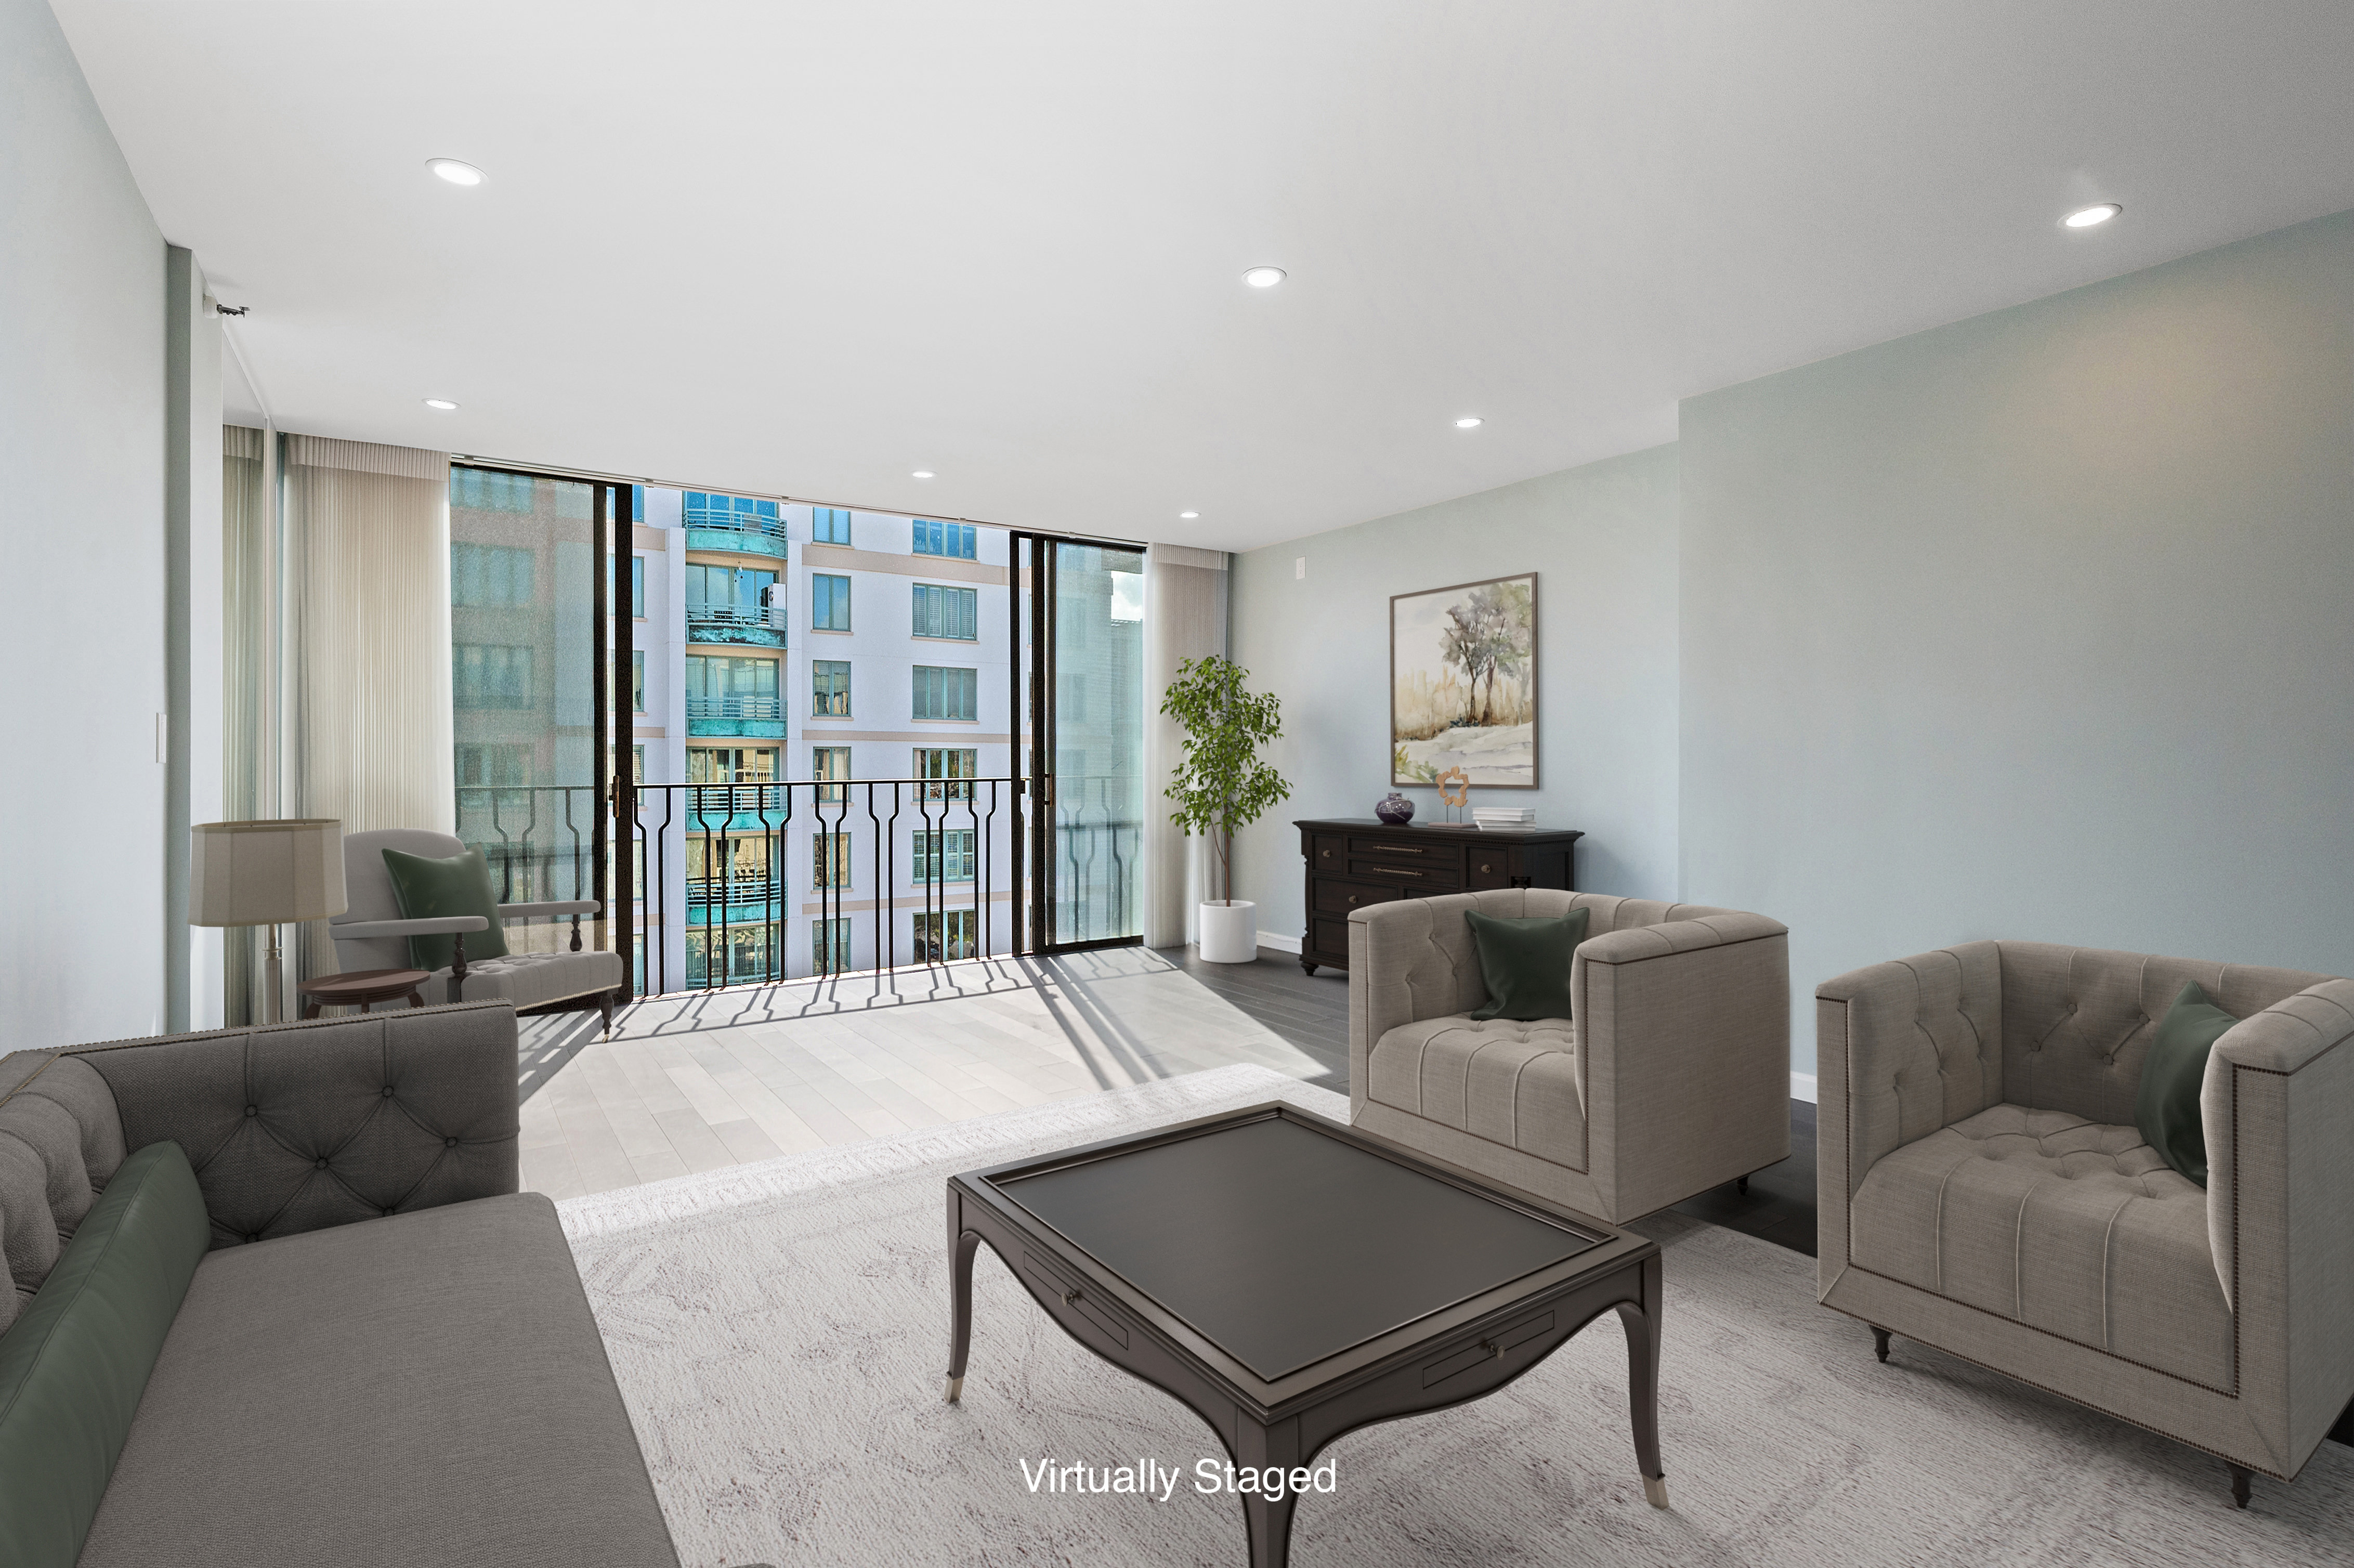 555 Laurel #509 is a 2 bedroom condo at The Gramercy on the Park available for lease